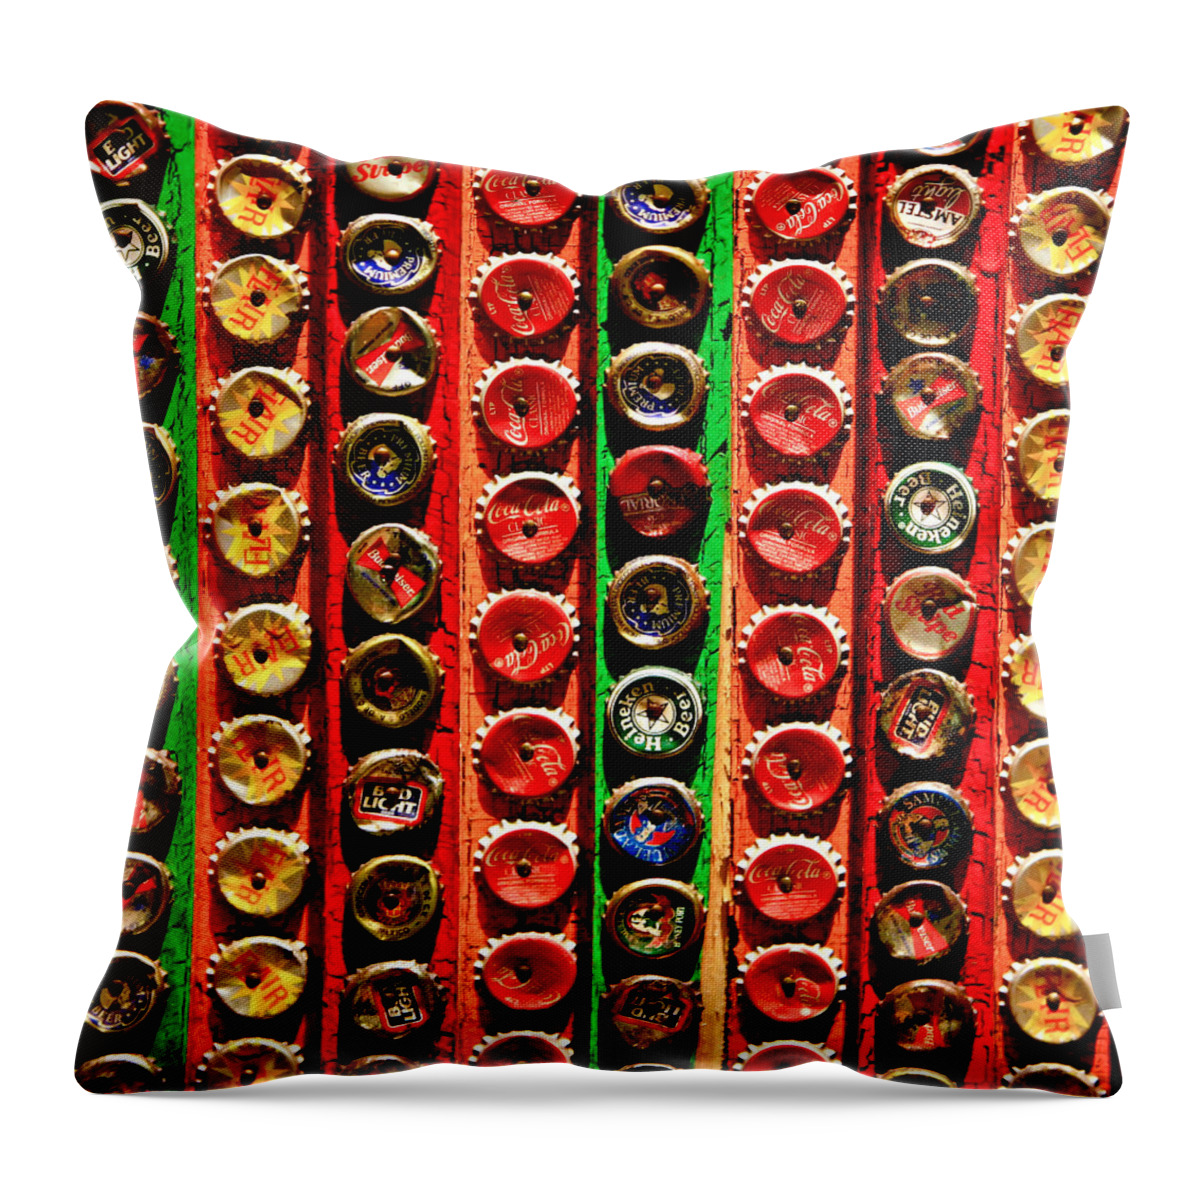 Caps Throw Pillow featuring the photograph Bottle Caps #1 by Art Block Collections